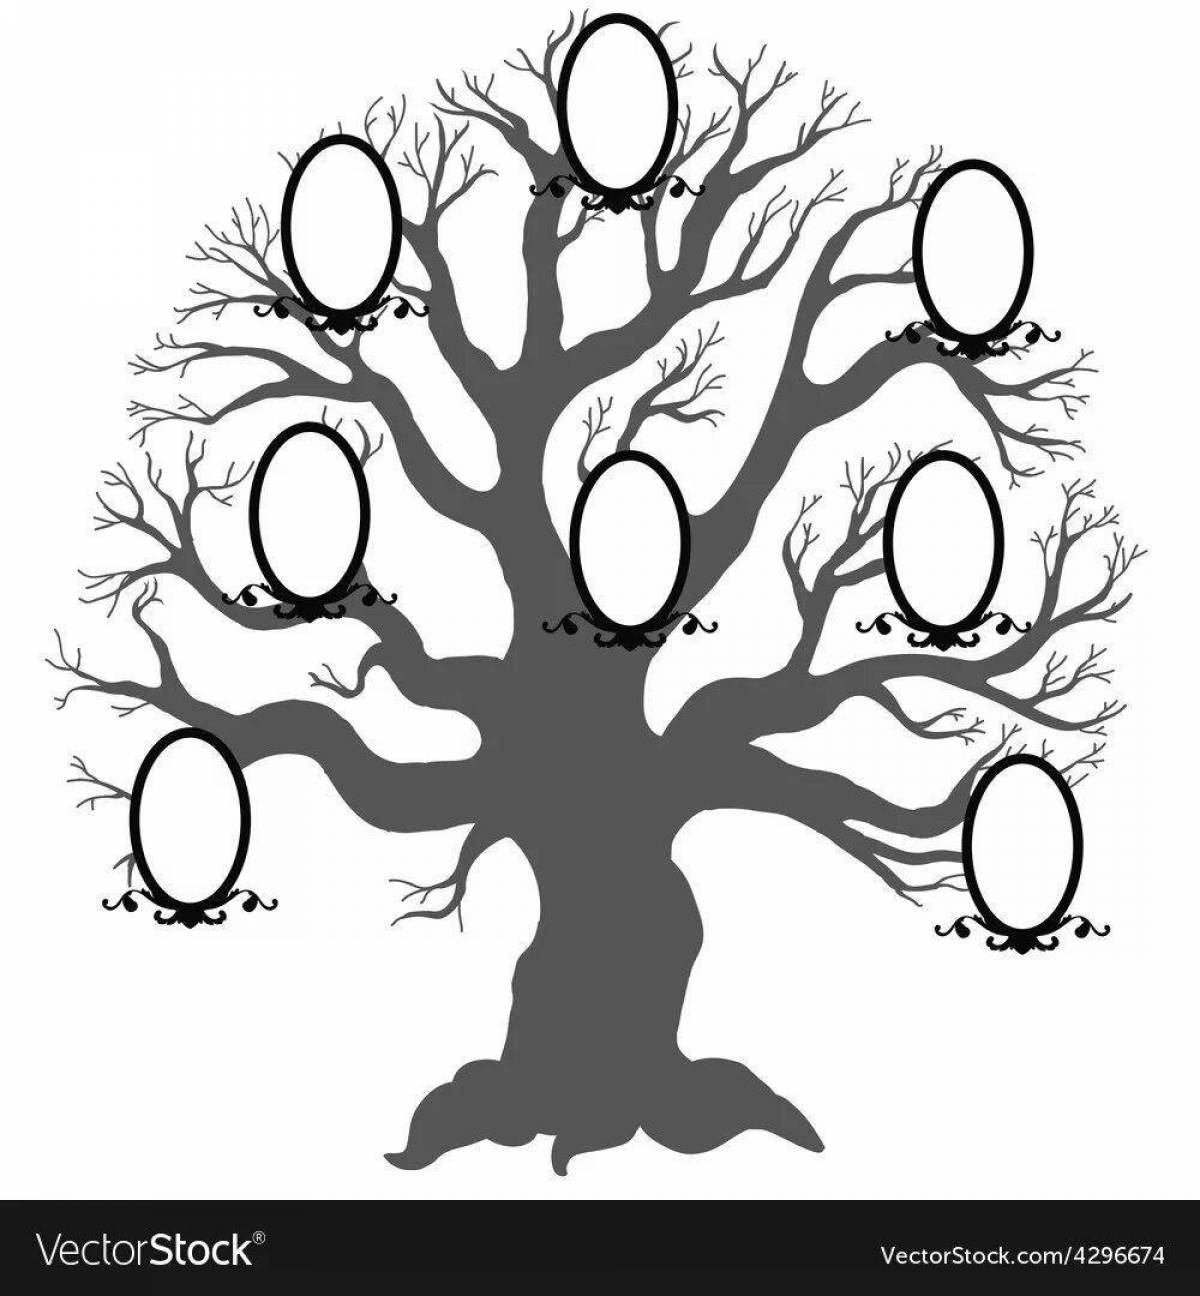 Animated family tree coloring page